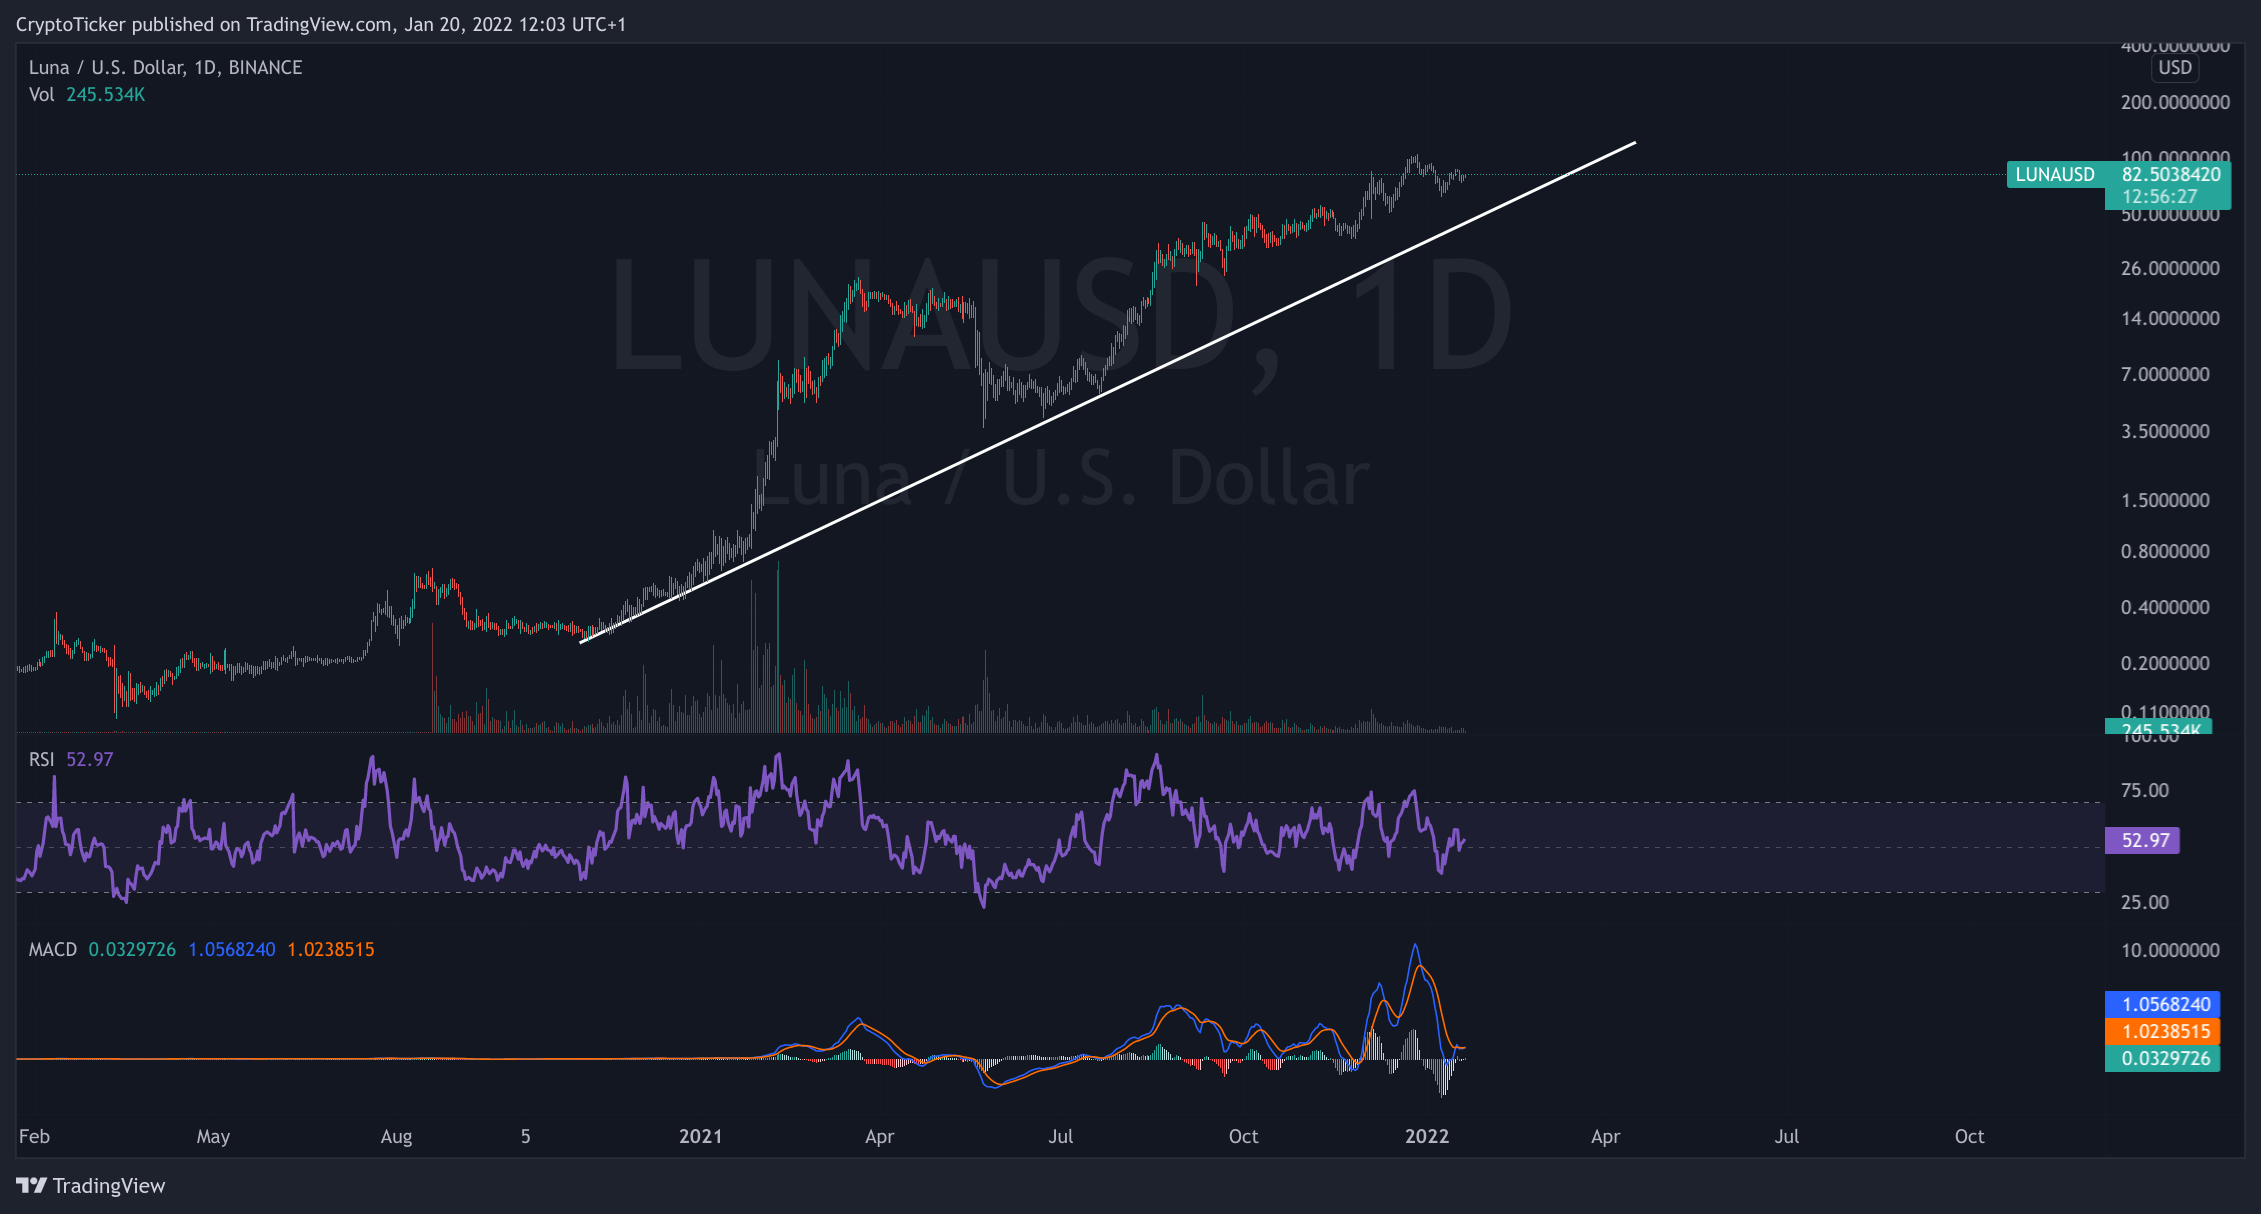 Terra luna crypto - LUNA/USD 1-day chart showing the uptrend of LUNA